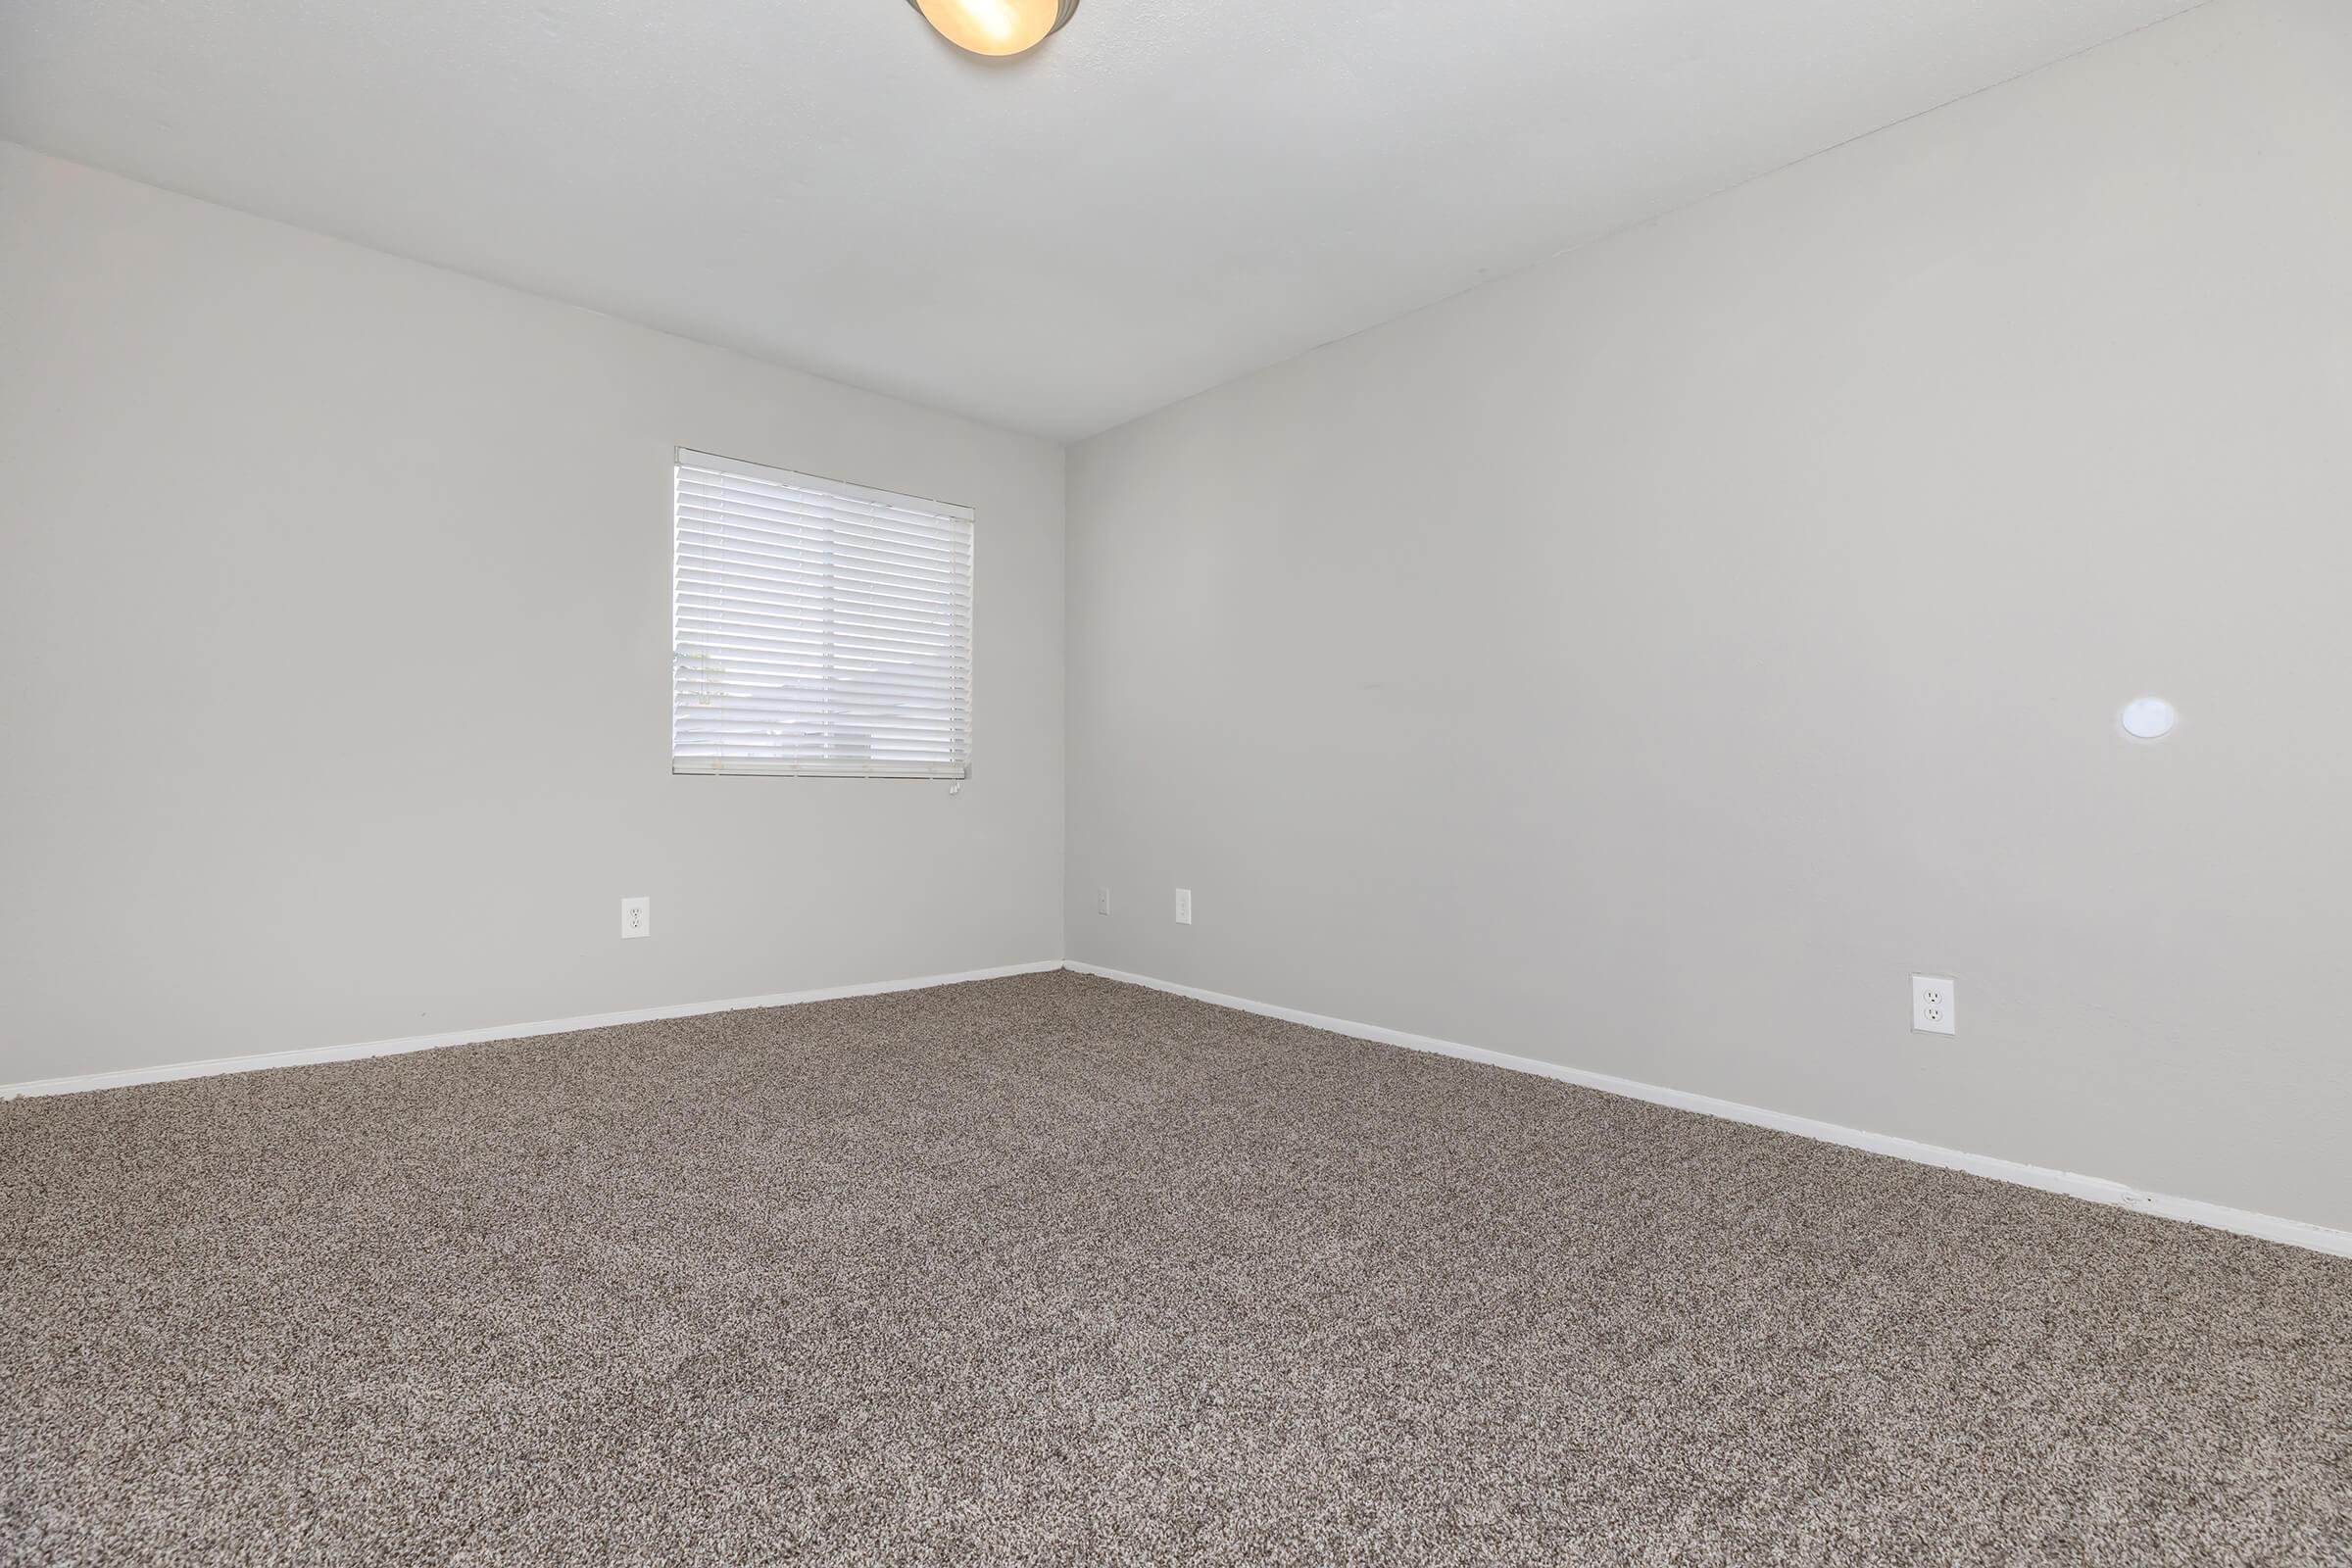 1 BEDROOM APARTMENT FOR RENT IN HOUSTON